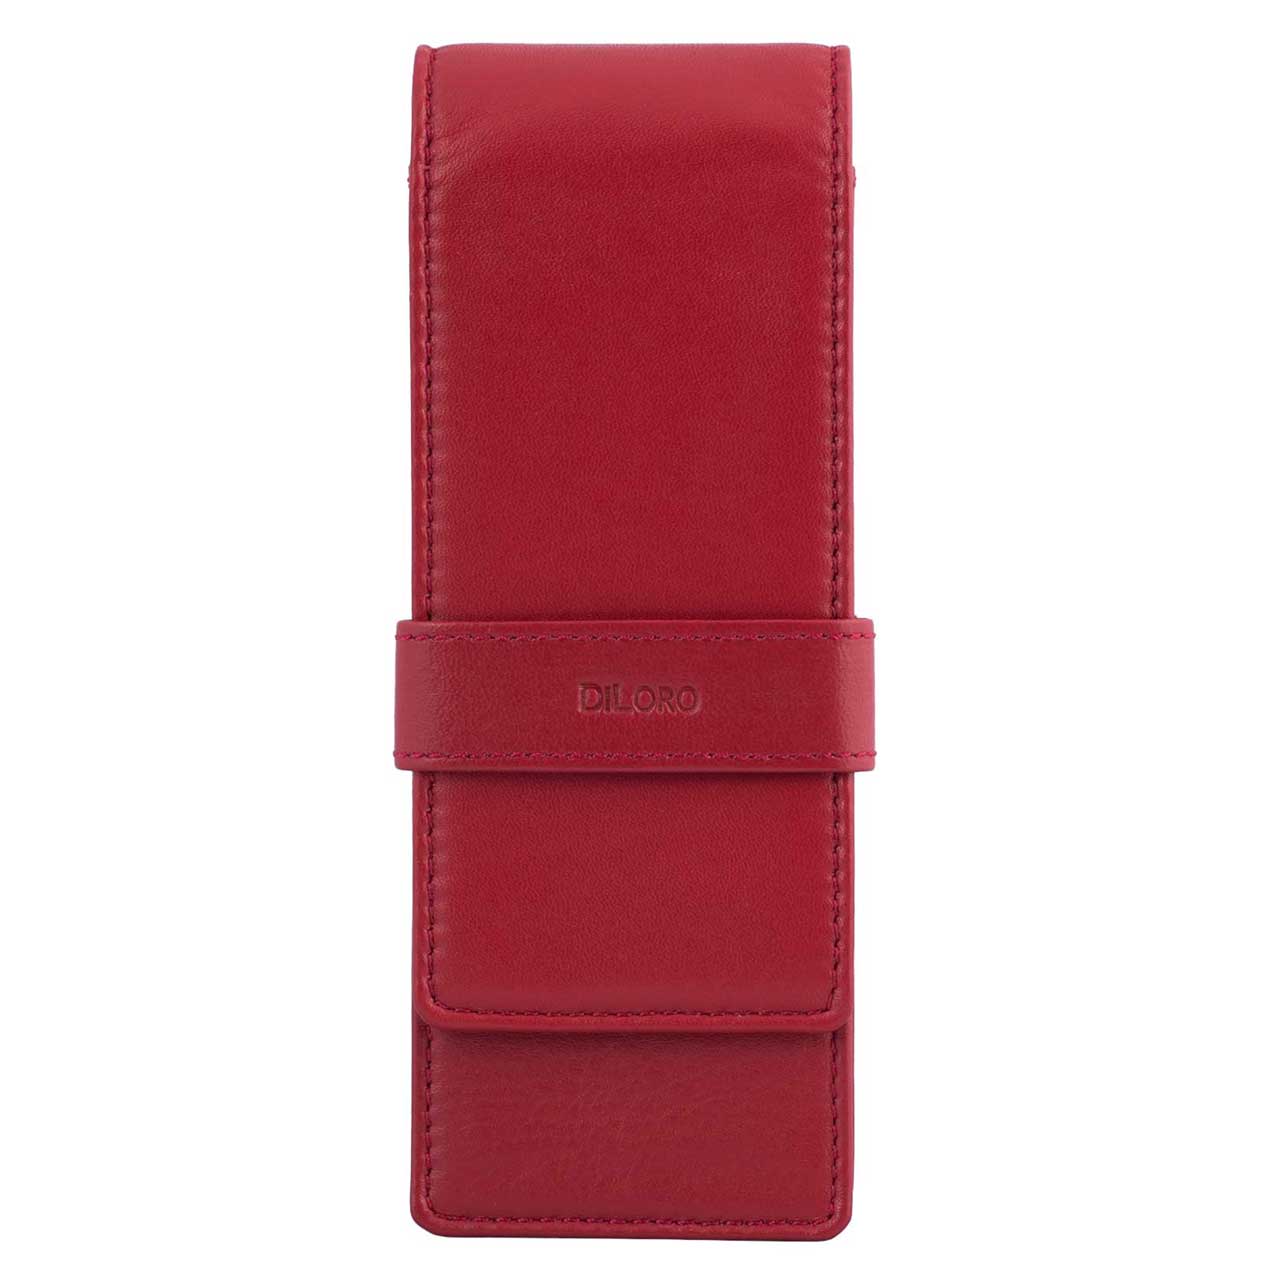 DiLoro Leather Triple Pen and Pencil Holder - Venetian Red Front Closed